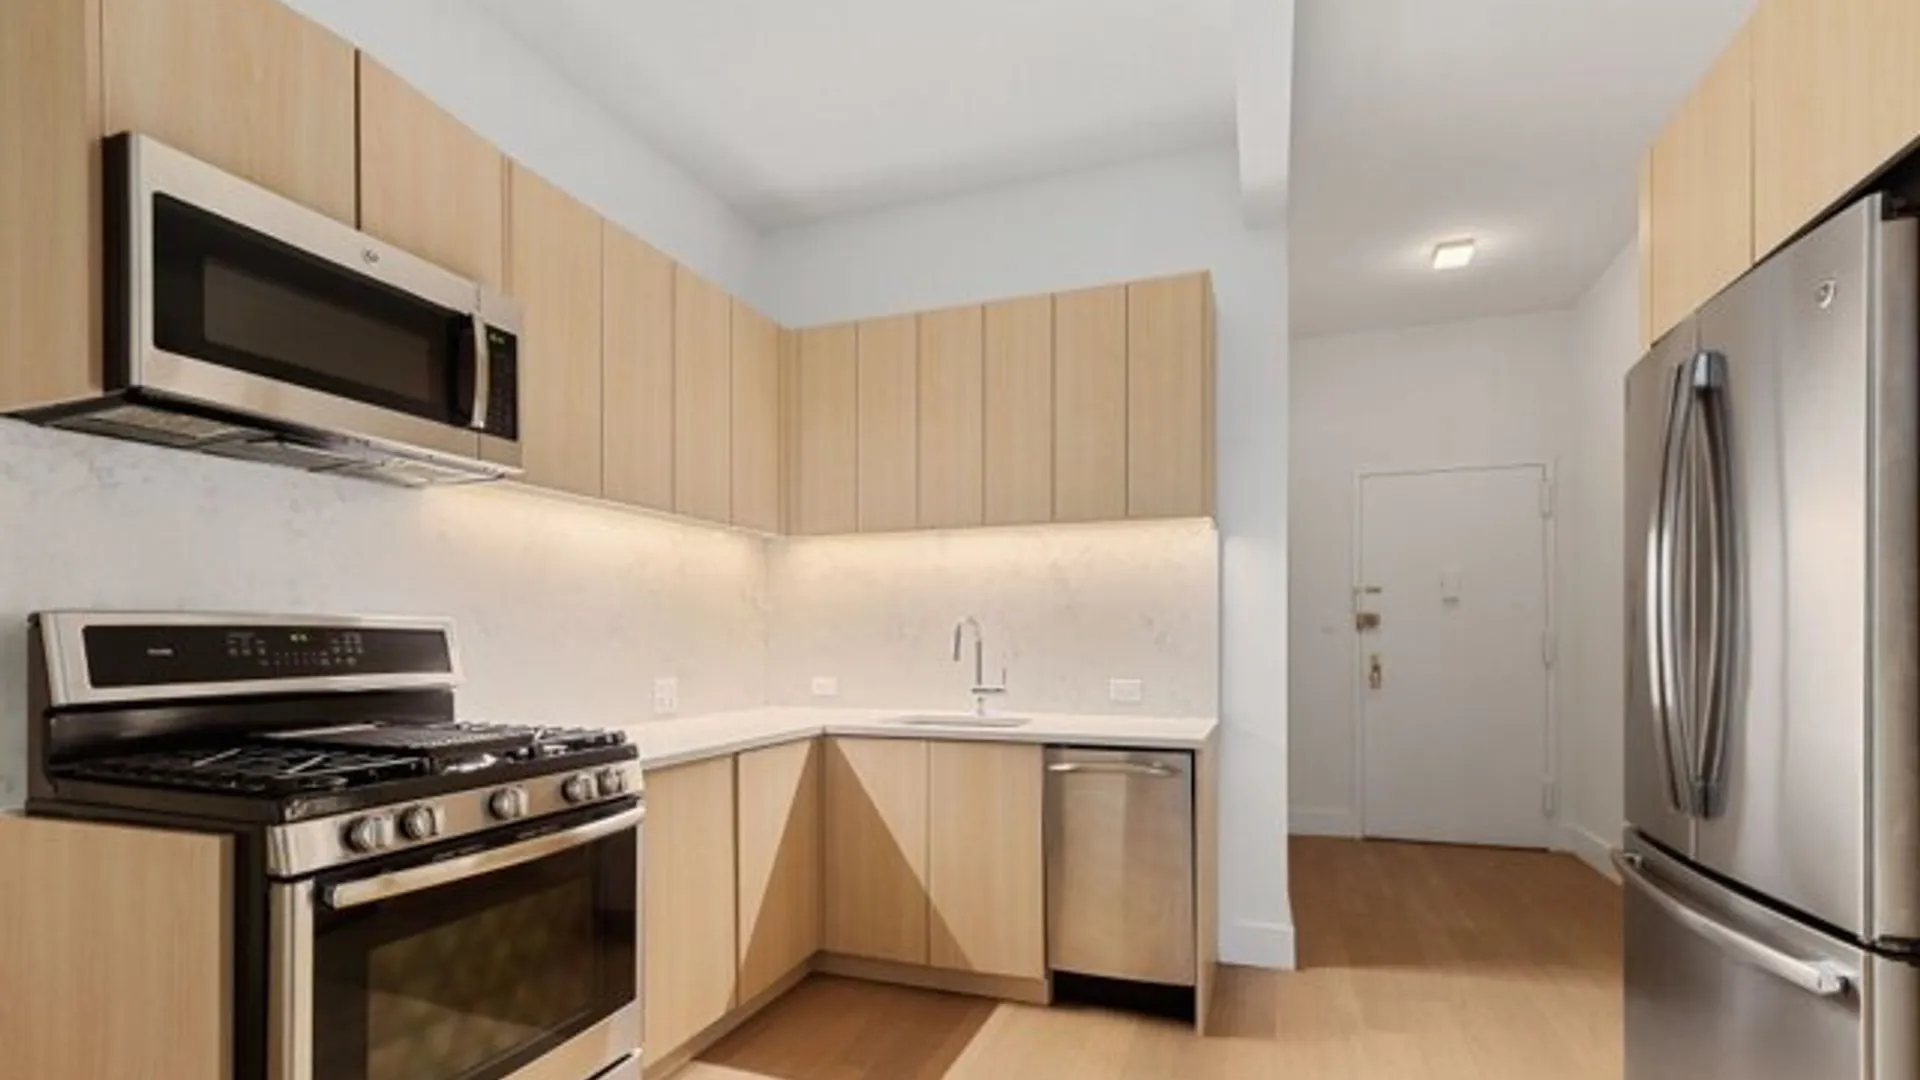 31 East 31st Street, New York, NY 10016, USA | 2 bed house for rent